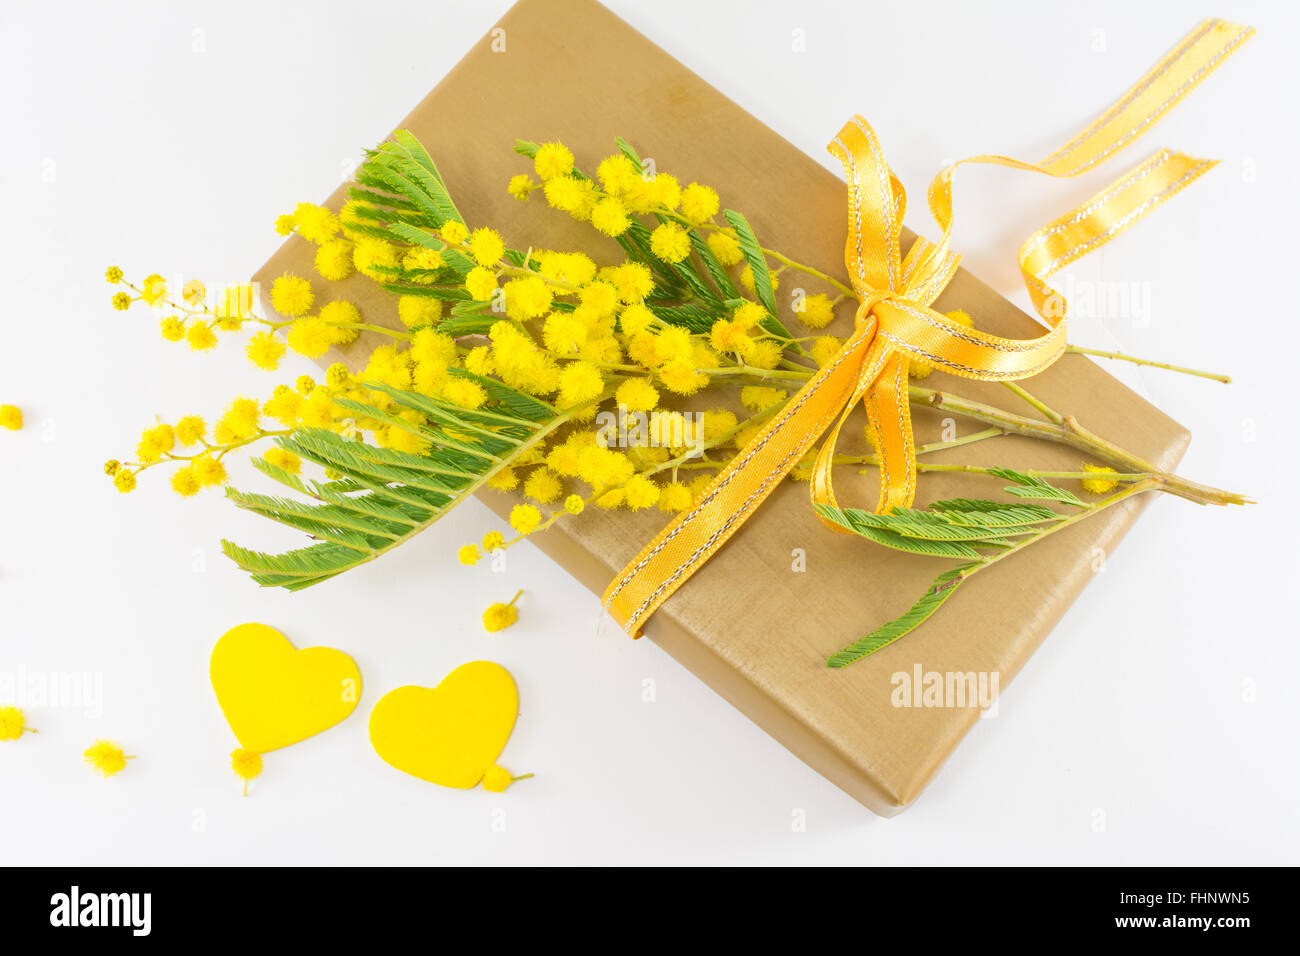 Bouquet of mimosa pudica and a wrapped present Stock Photo